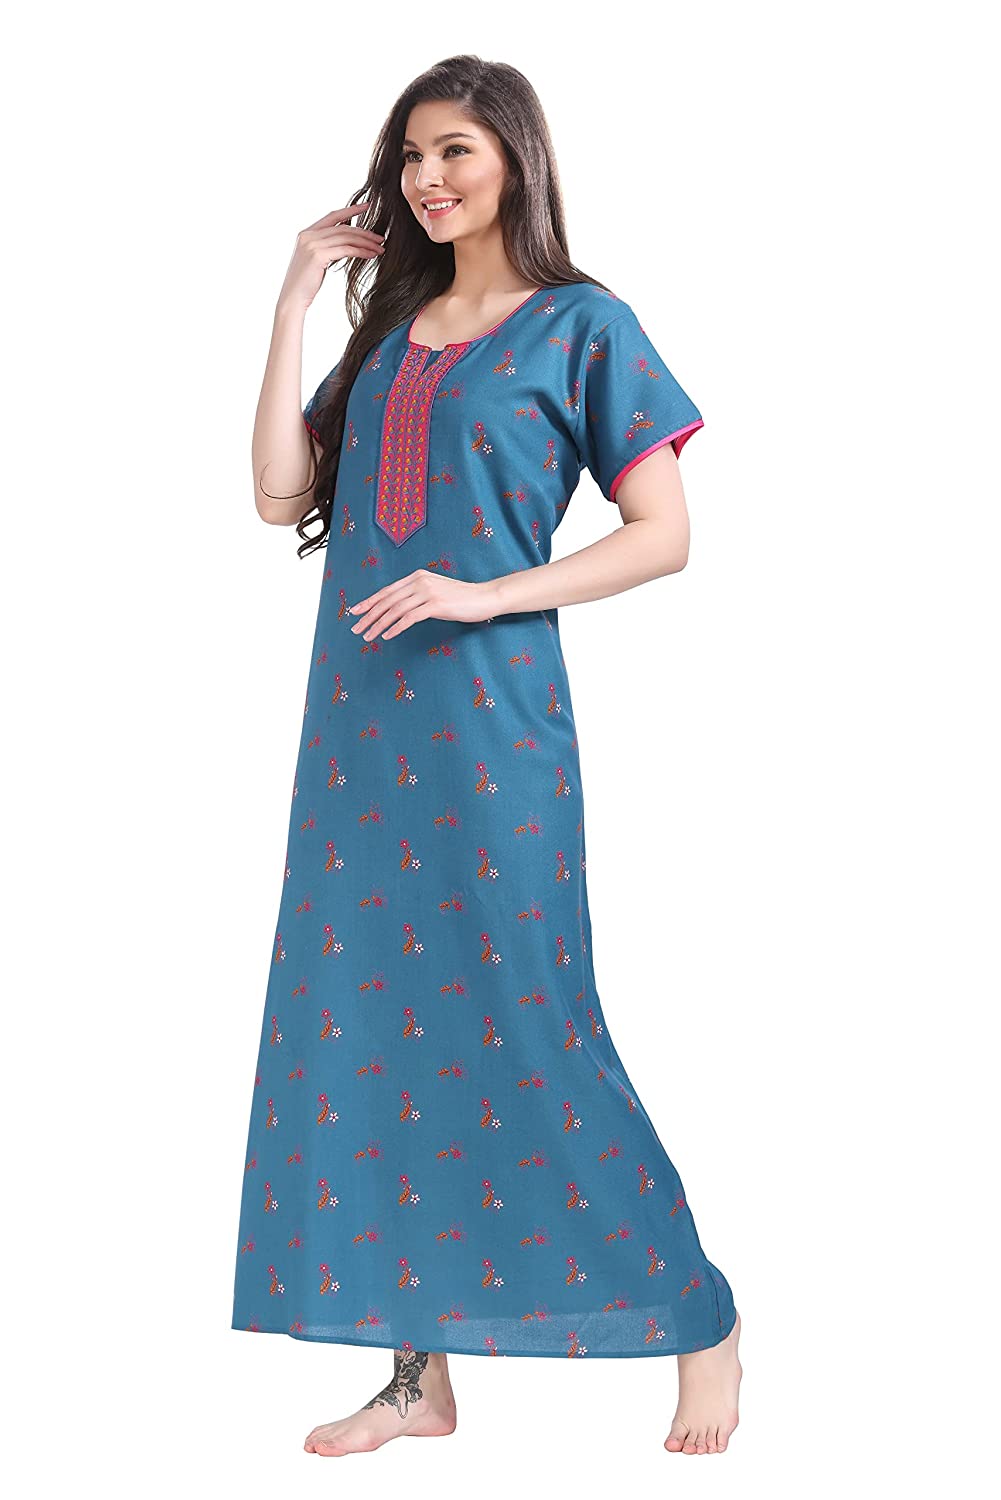 Printed Full Length Ladies Hosiery Cotton Nighty Gown, 18+, Free Size at Rs  500/piece in Mumbai